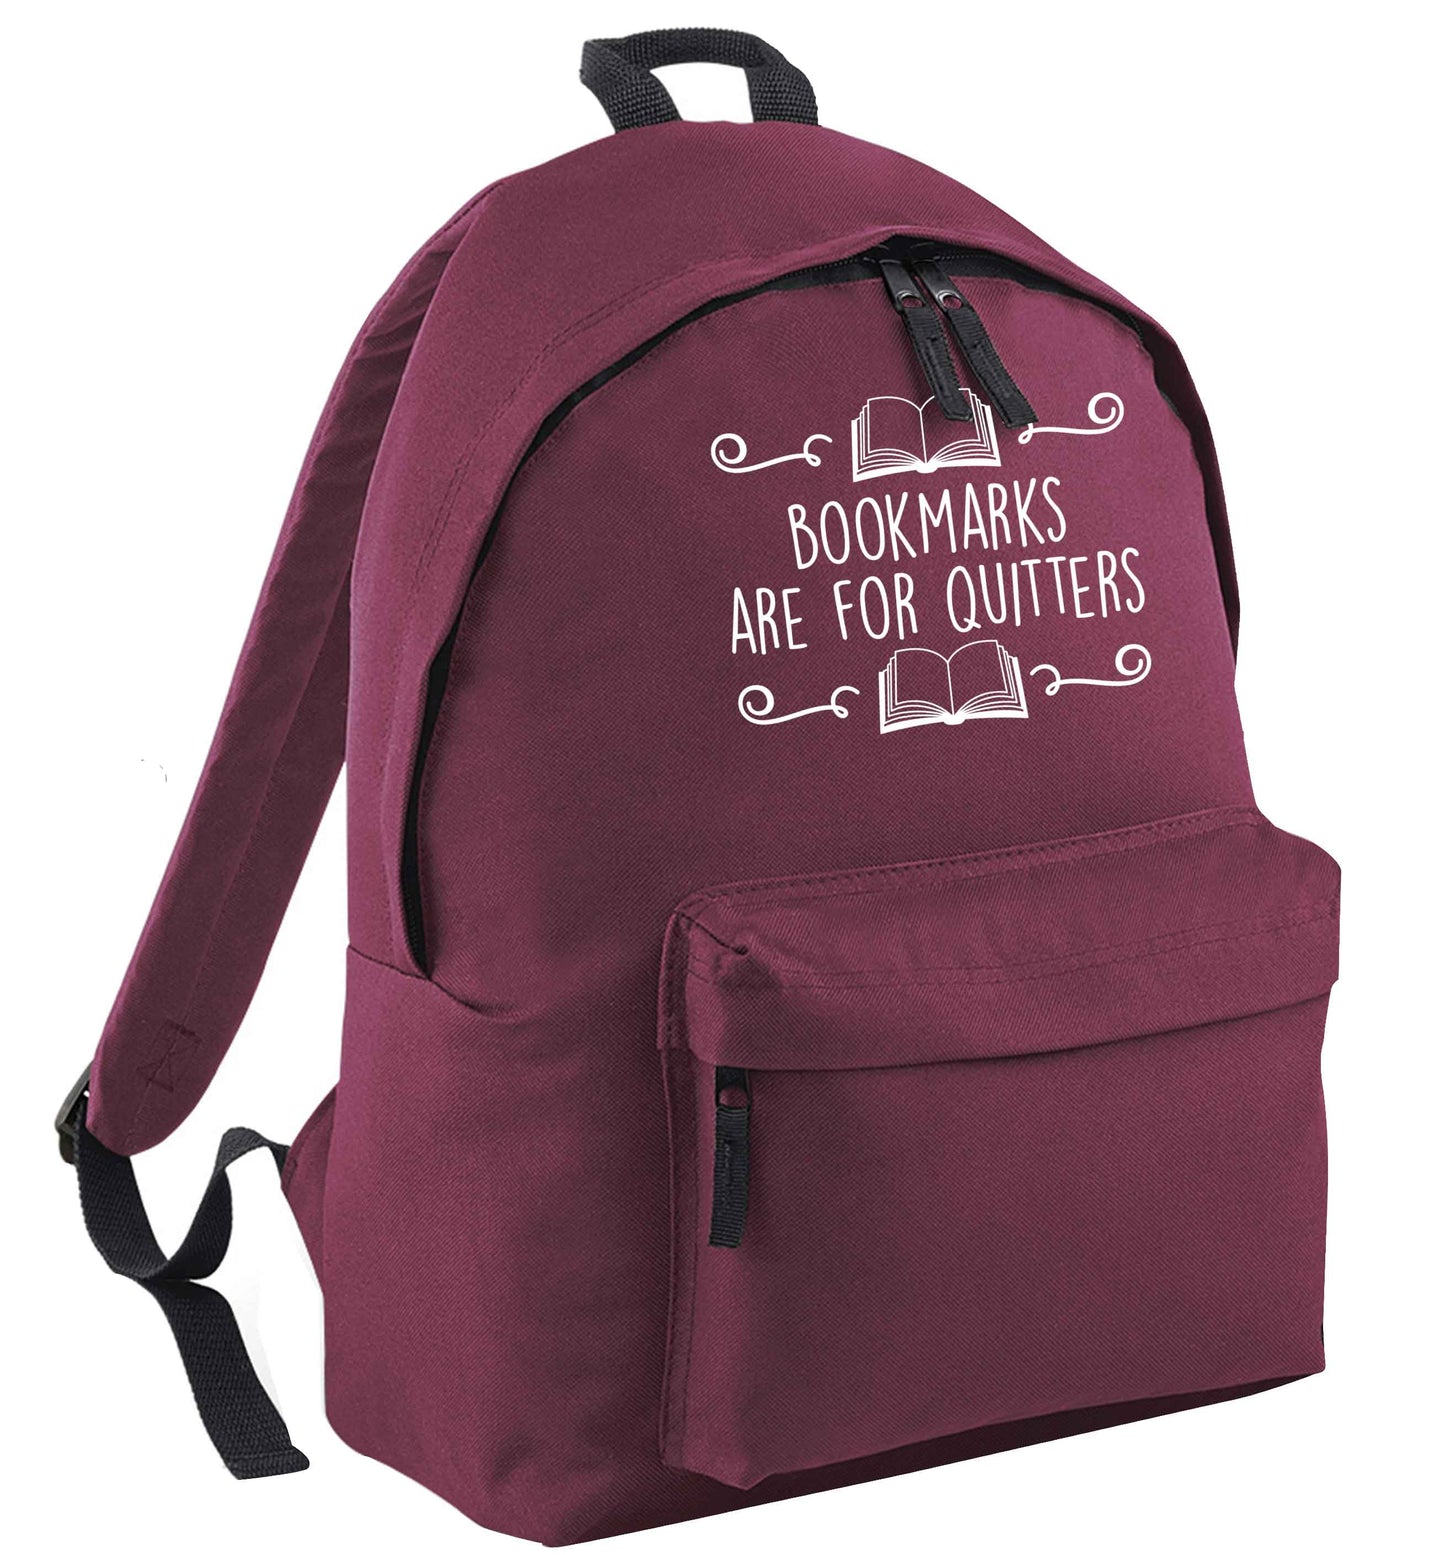 Bookmarks are for quitters maroon adults backpack